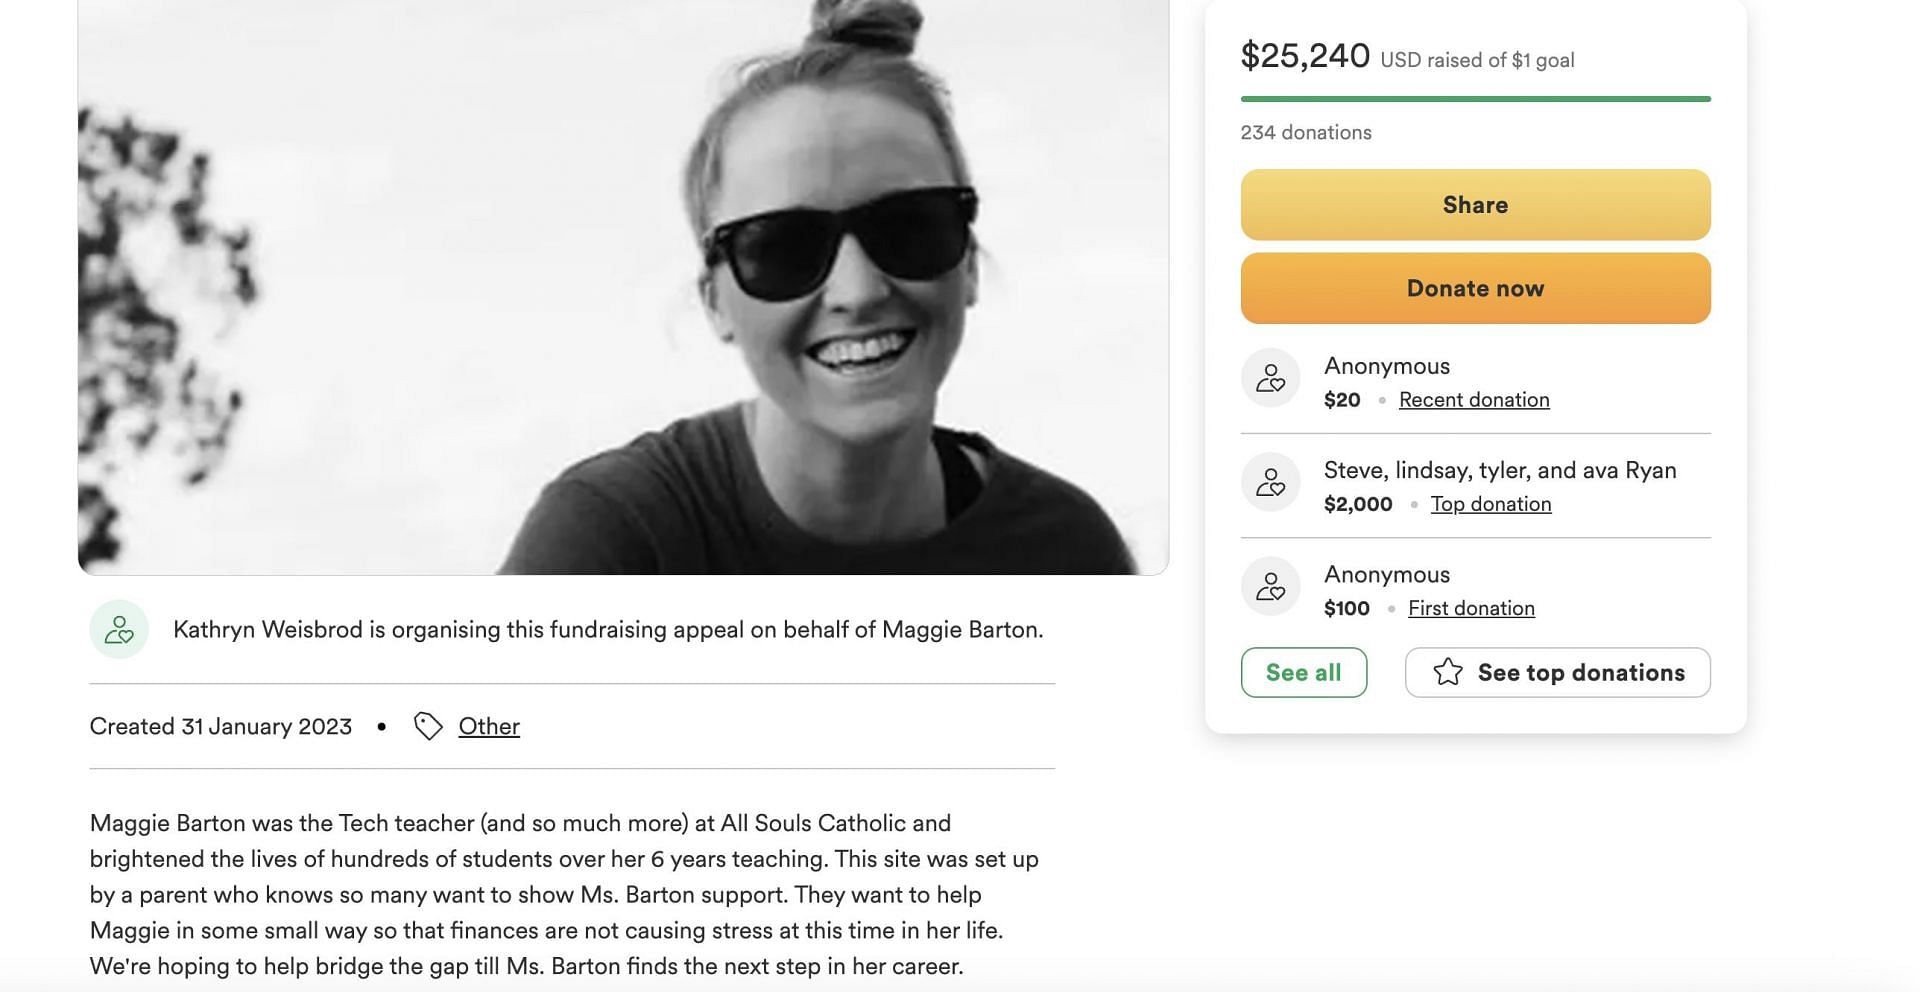 Parents of the school set up a GoFundMe page for Maggie Barton after the authorities fired her for being a relationship with a woman. (Image via GoFundMe)